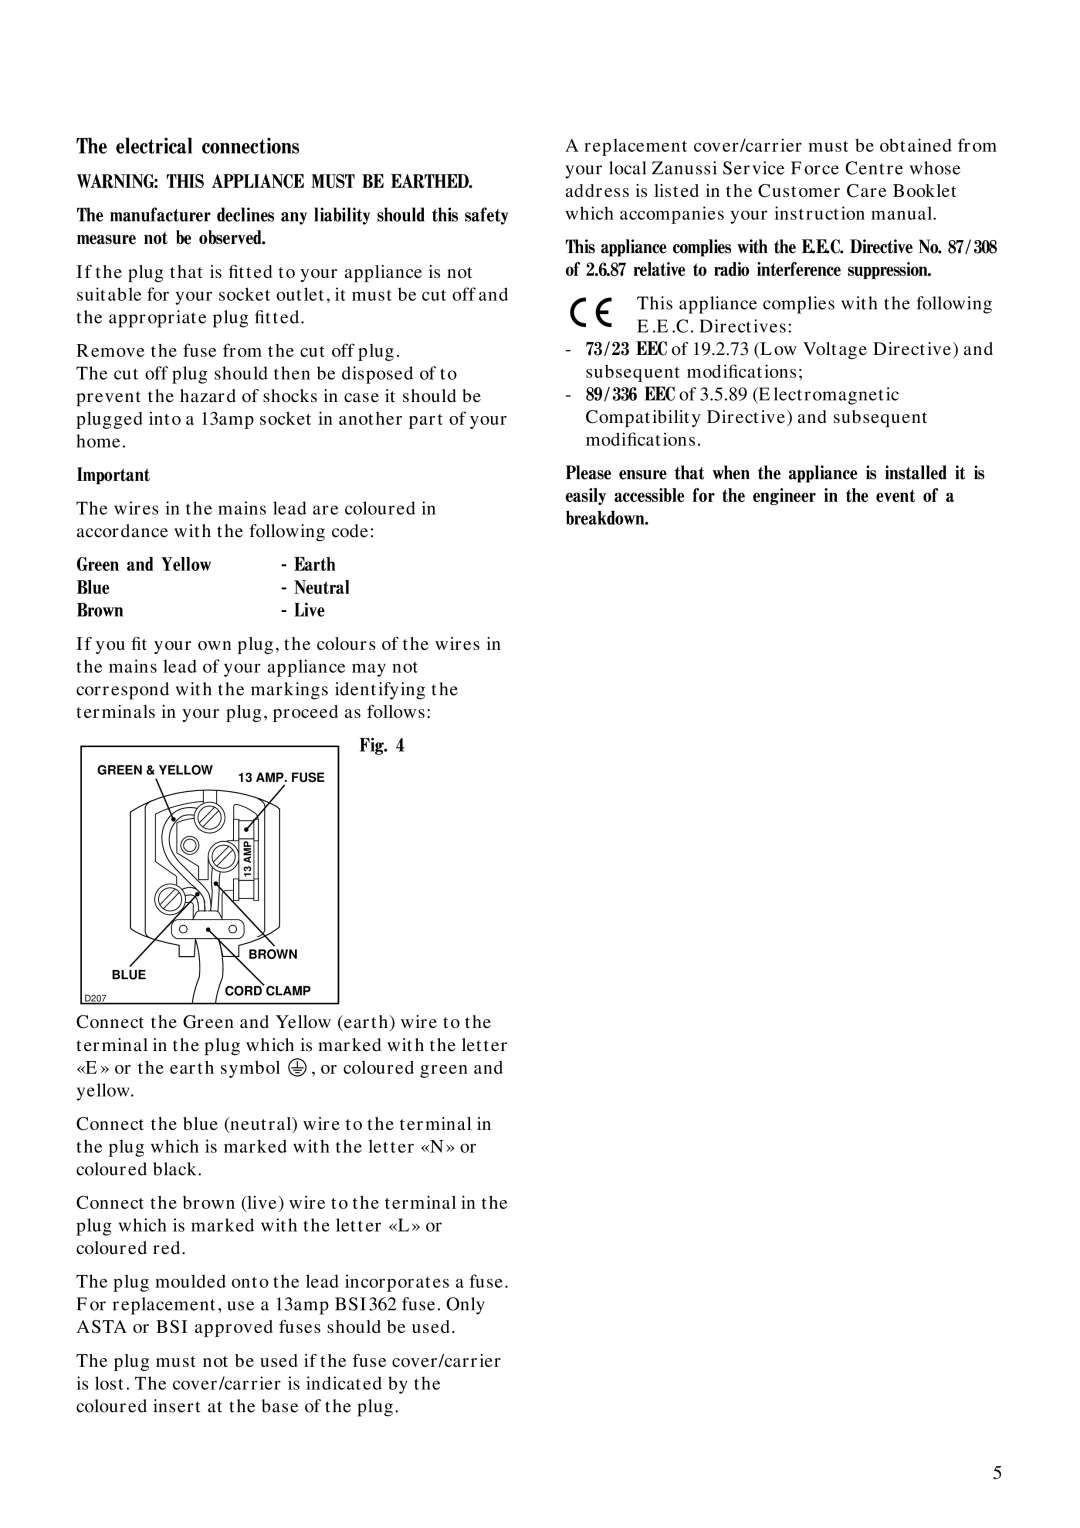 Zanussi ZFC 67/14 manual The electrical connections 